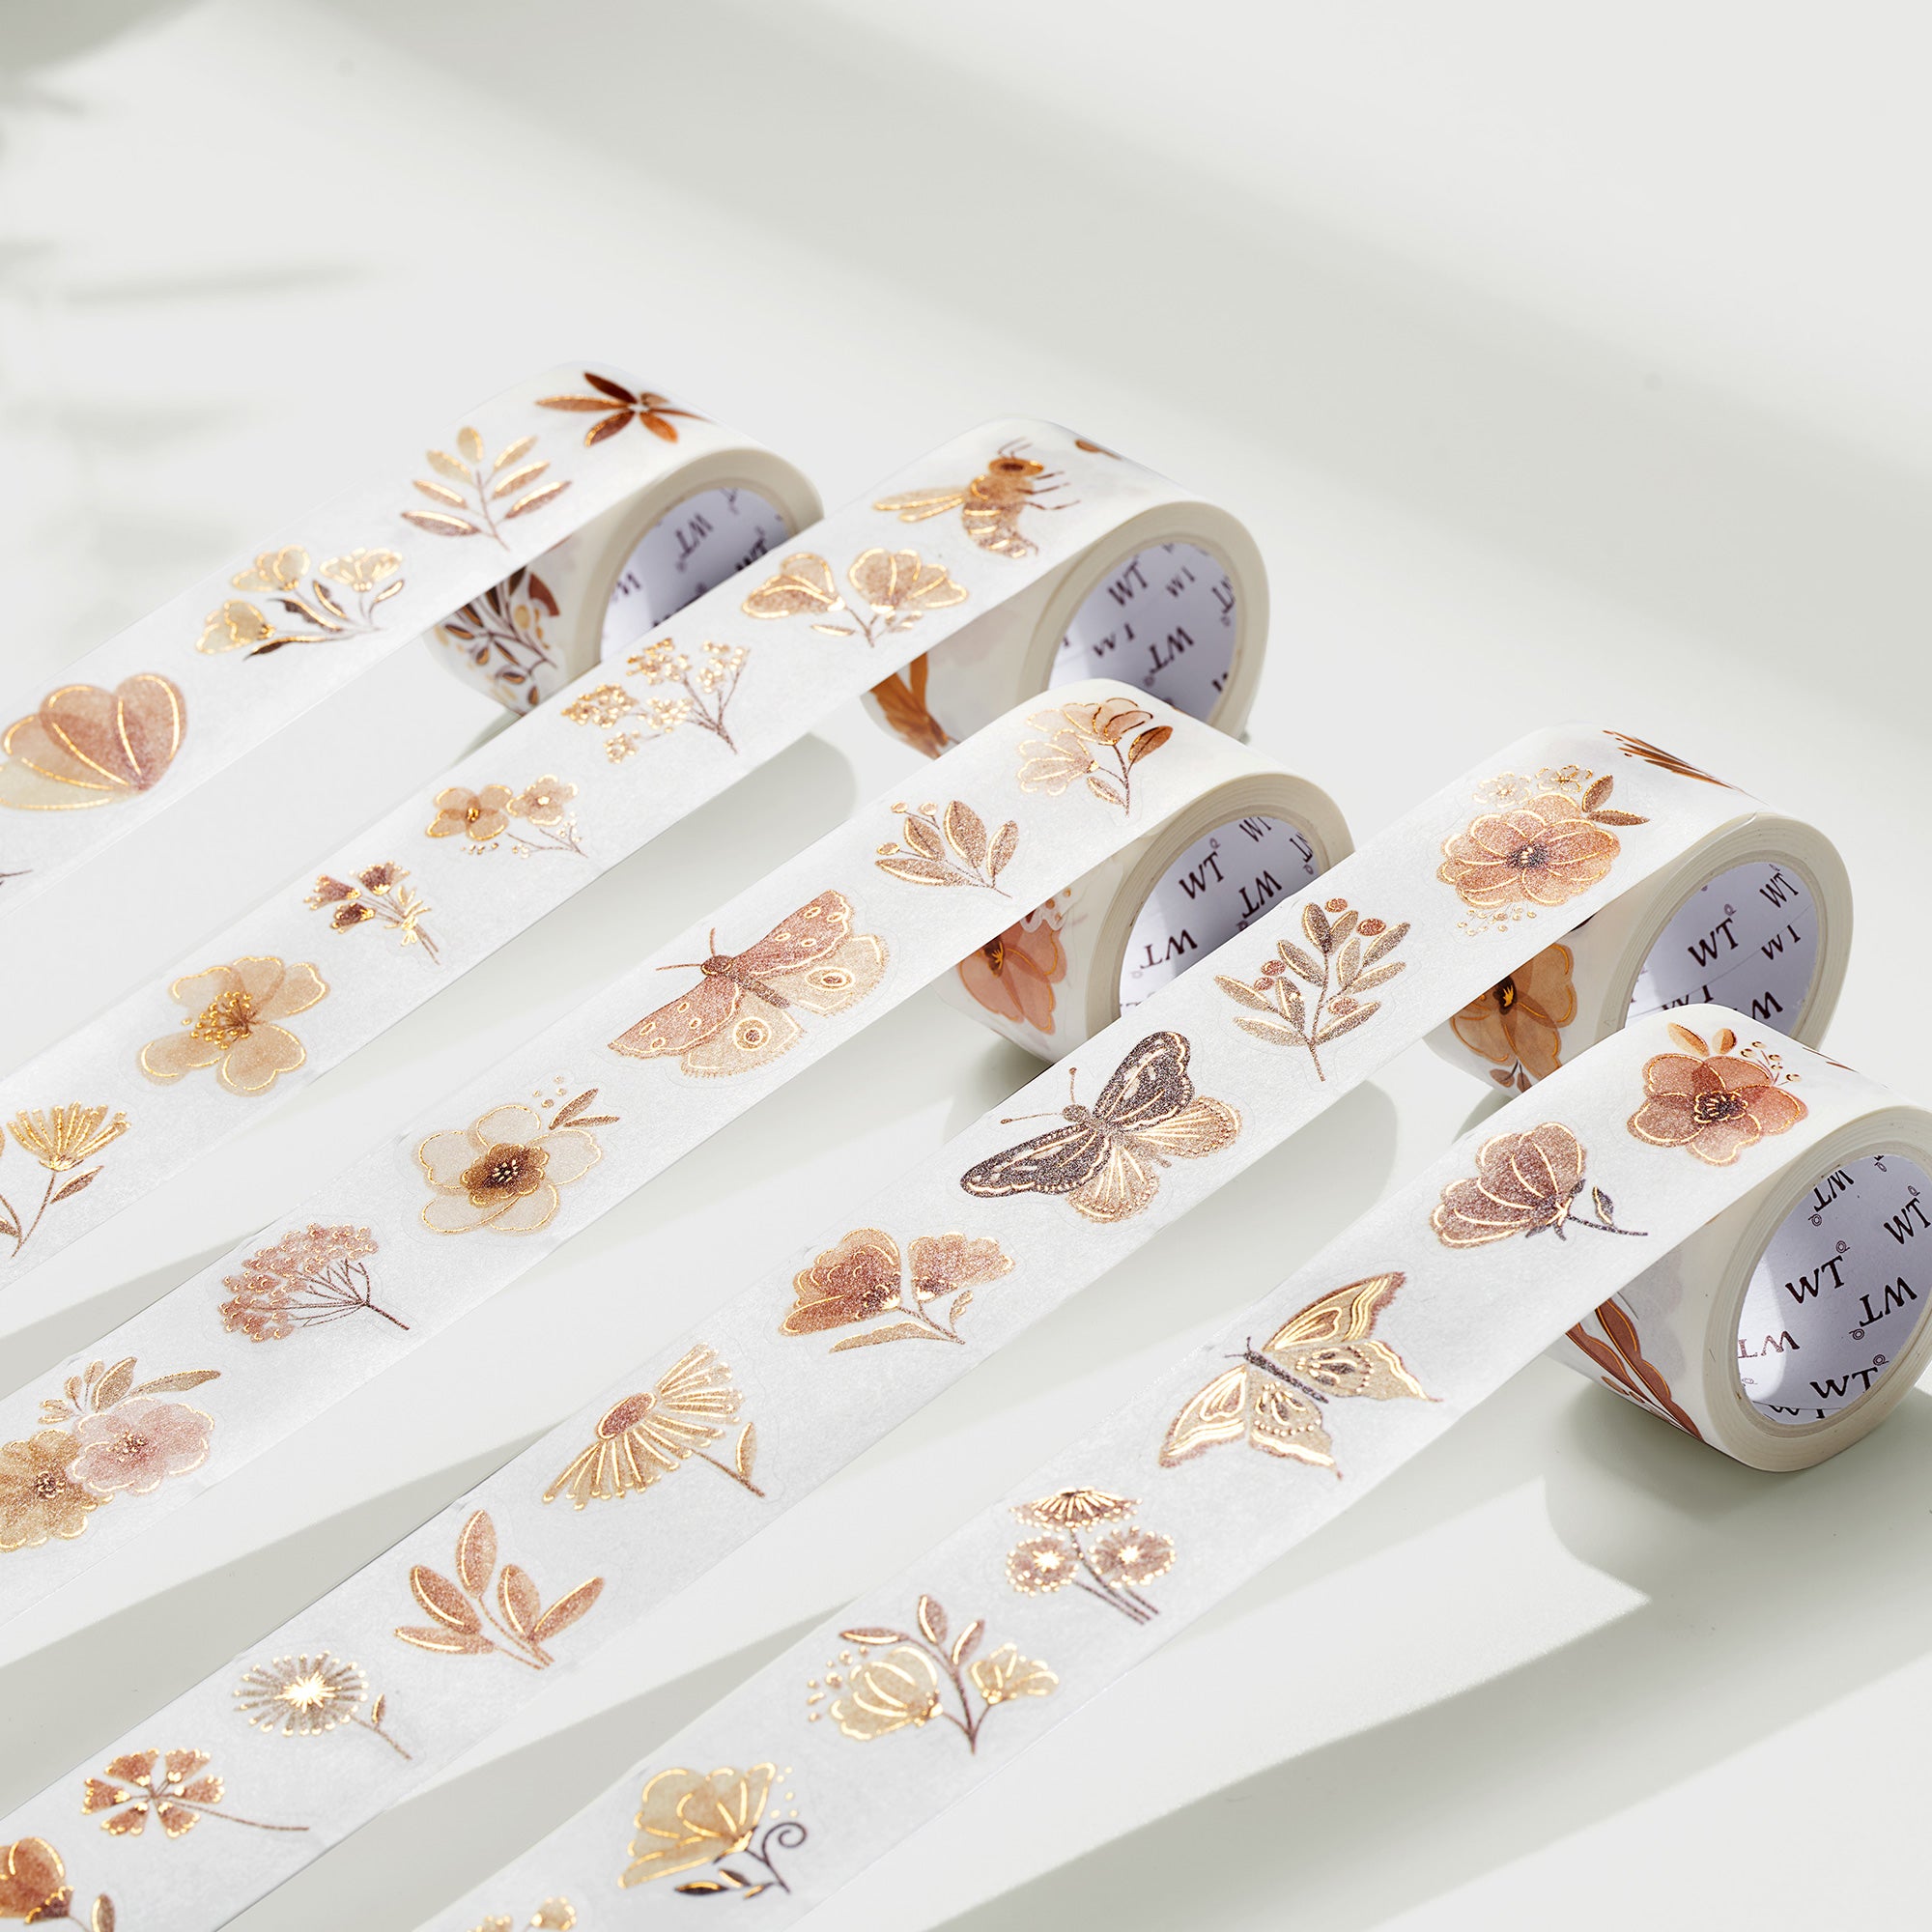 Misty Flower Washi Tape Sticker Set (GILDED) | The Washi Tape Shop. Beautiful Washi and Decorative Tape For Bullet Journals, Gift Wrapping, Planner Decoration and DIY Projects